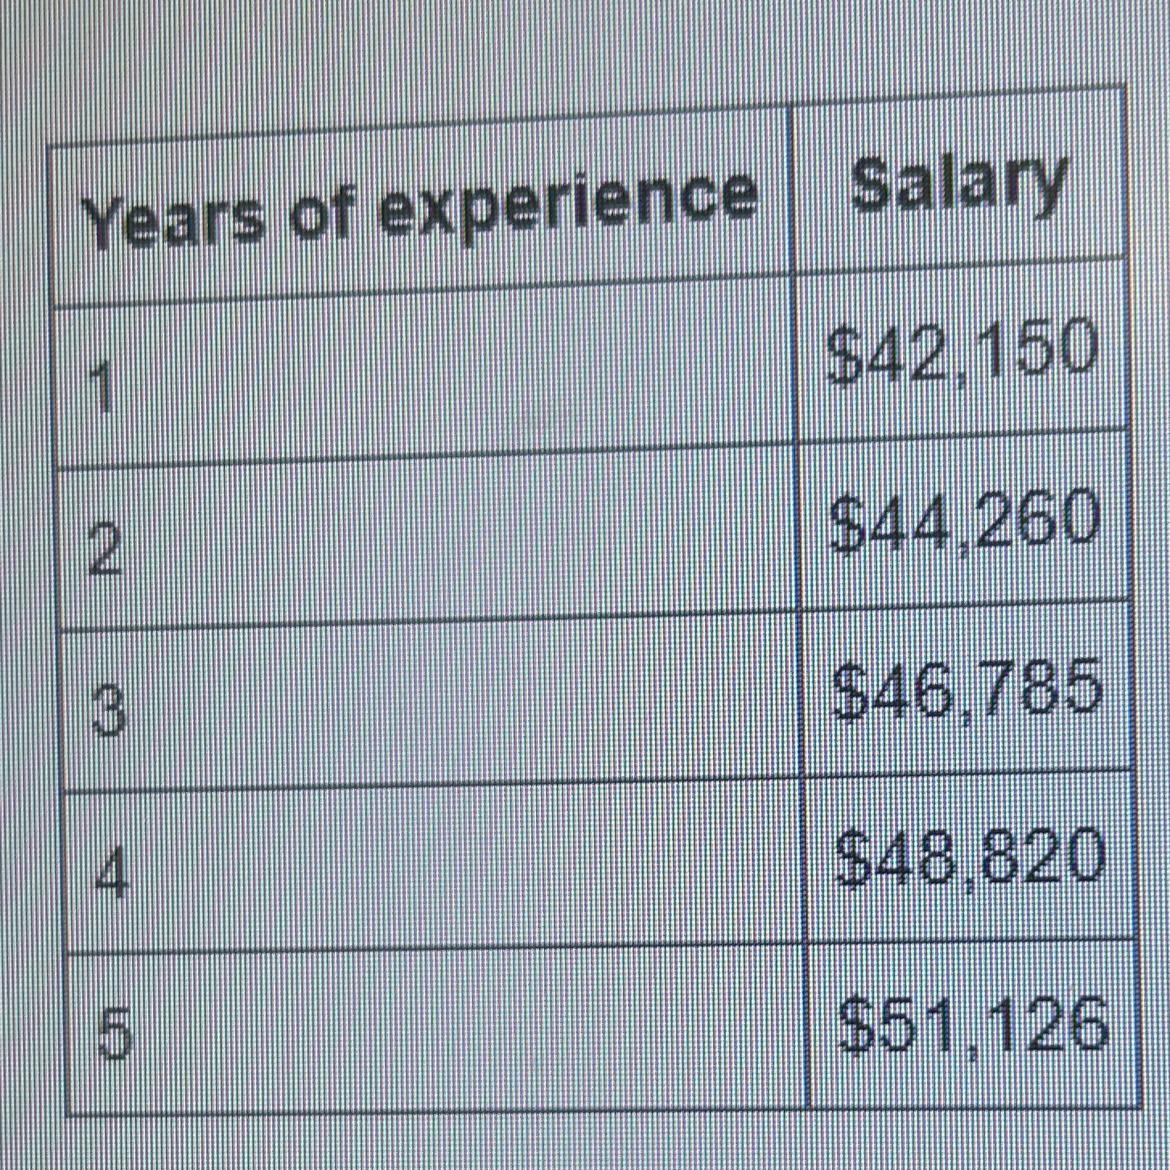 A Company Determines An Employee's Starting Salary According To The Number Of Years Of Experience, As